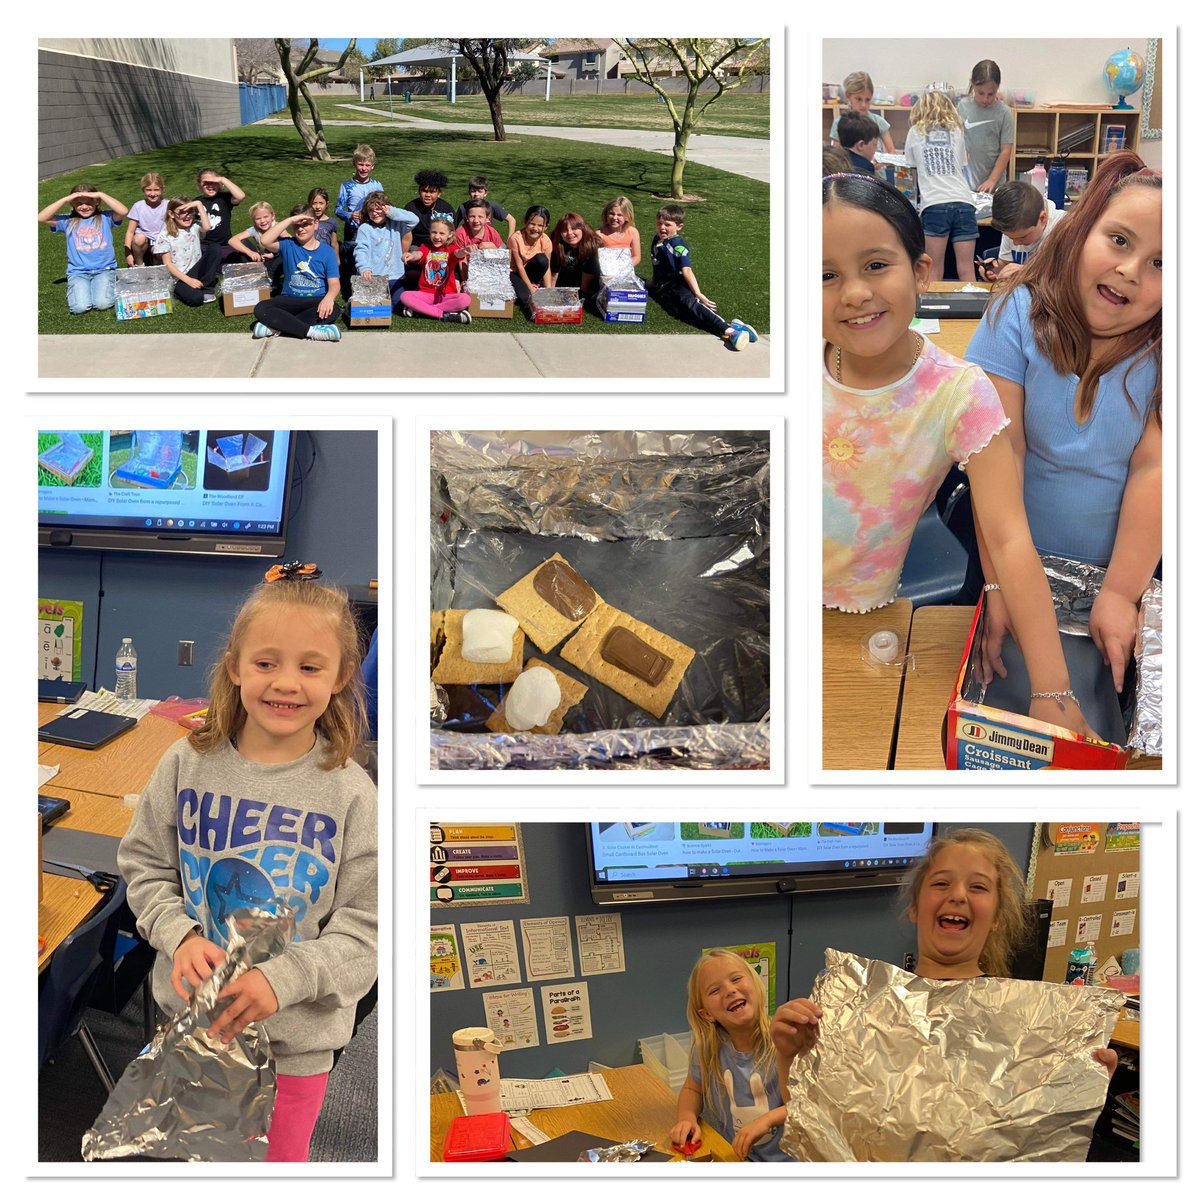 2nd graders in Mrs. Alway’s class created solar ovens today! Enjoying the beautiful day while practicing stem engineering- sounds like a great day! @DVUSD #wearestem #stem #stemeducation